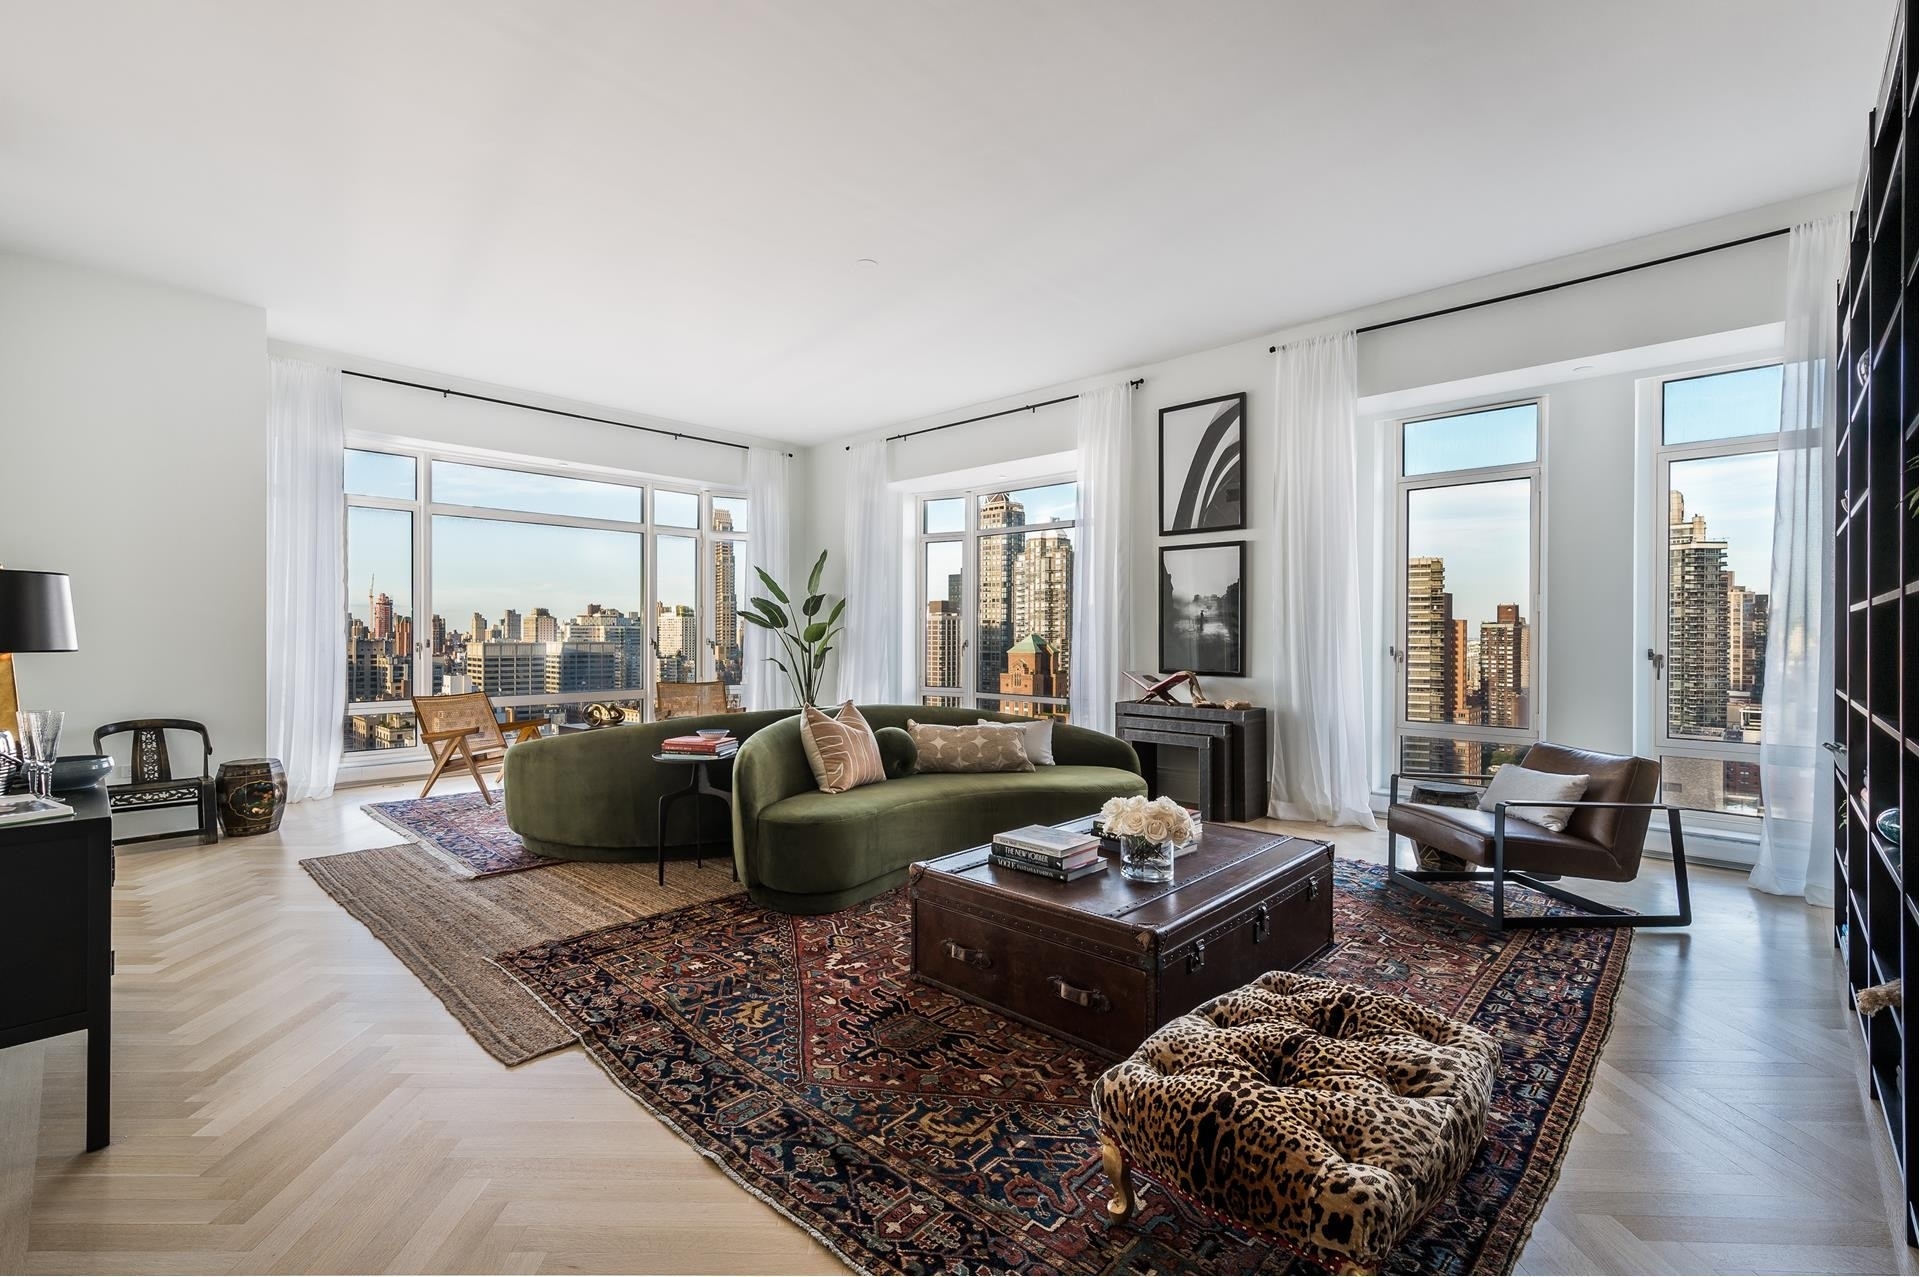 Property at 520 PARK AVE , 25 New York